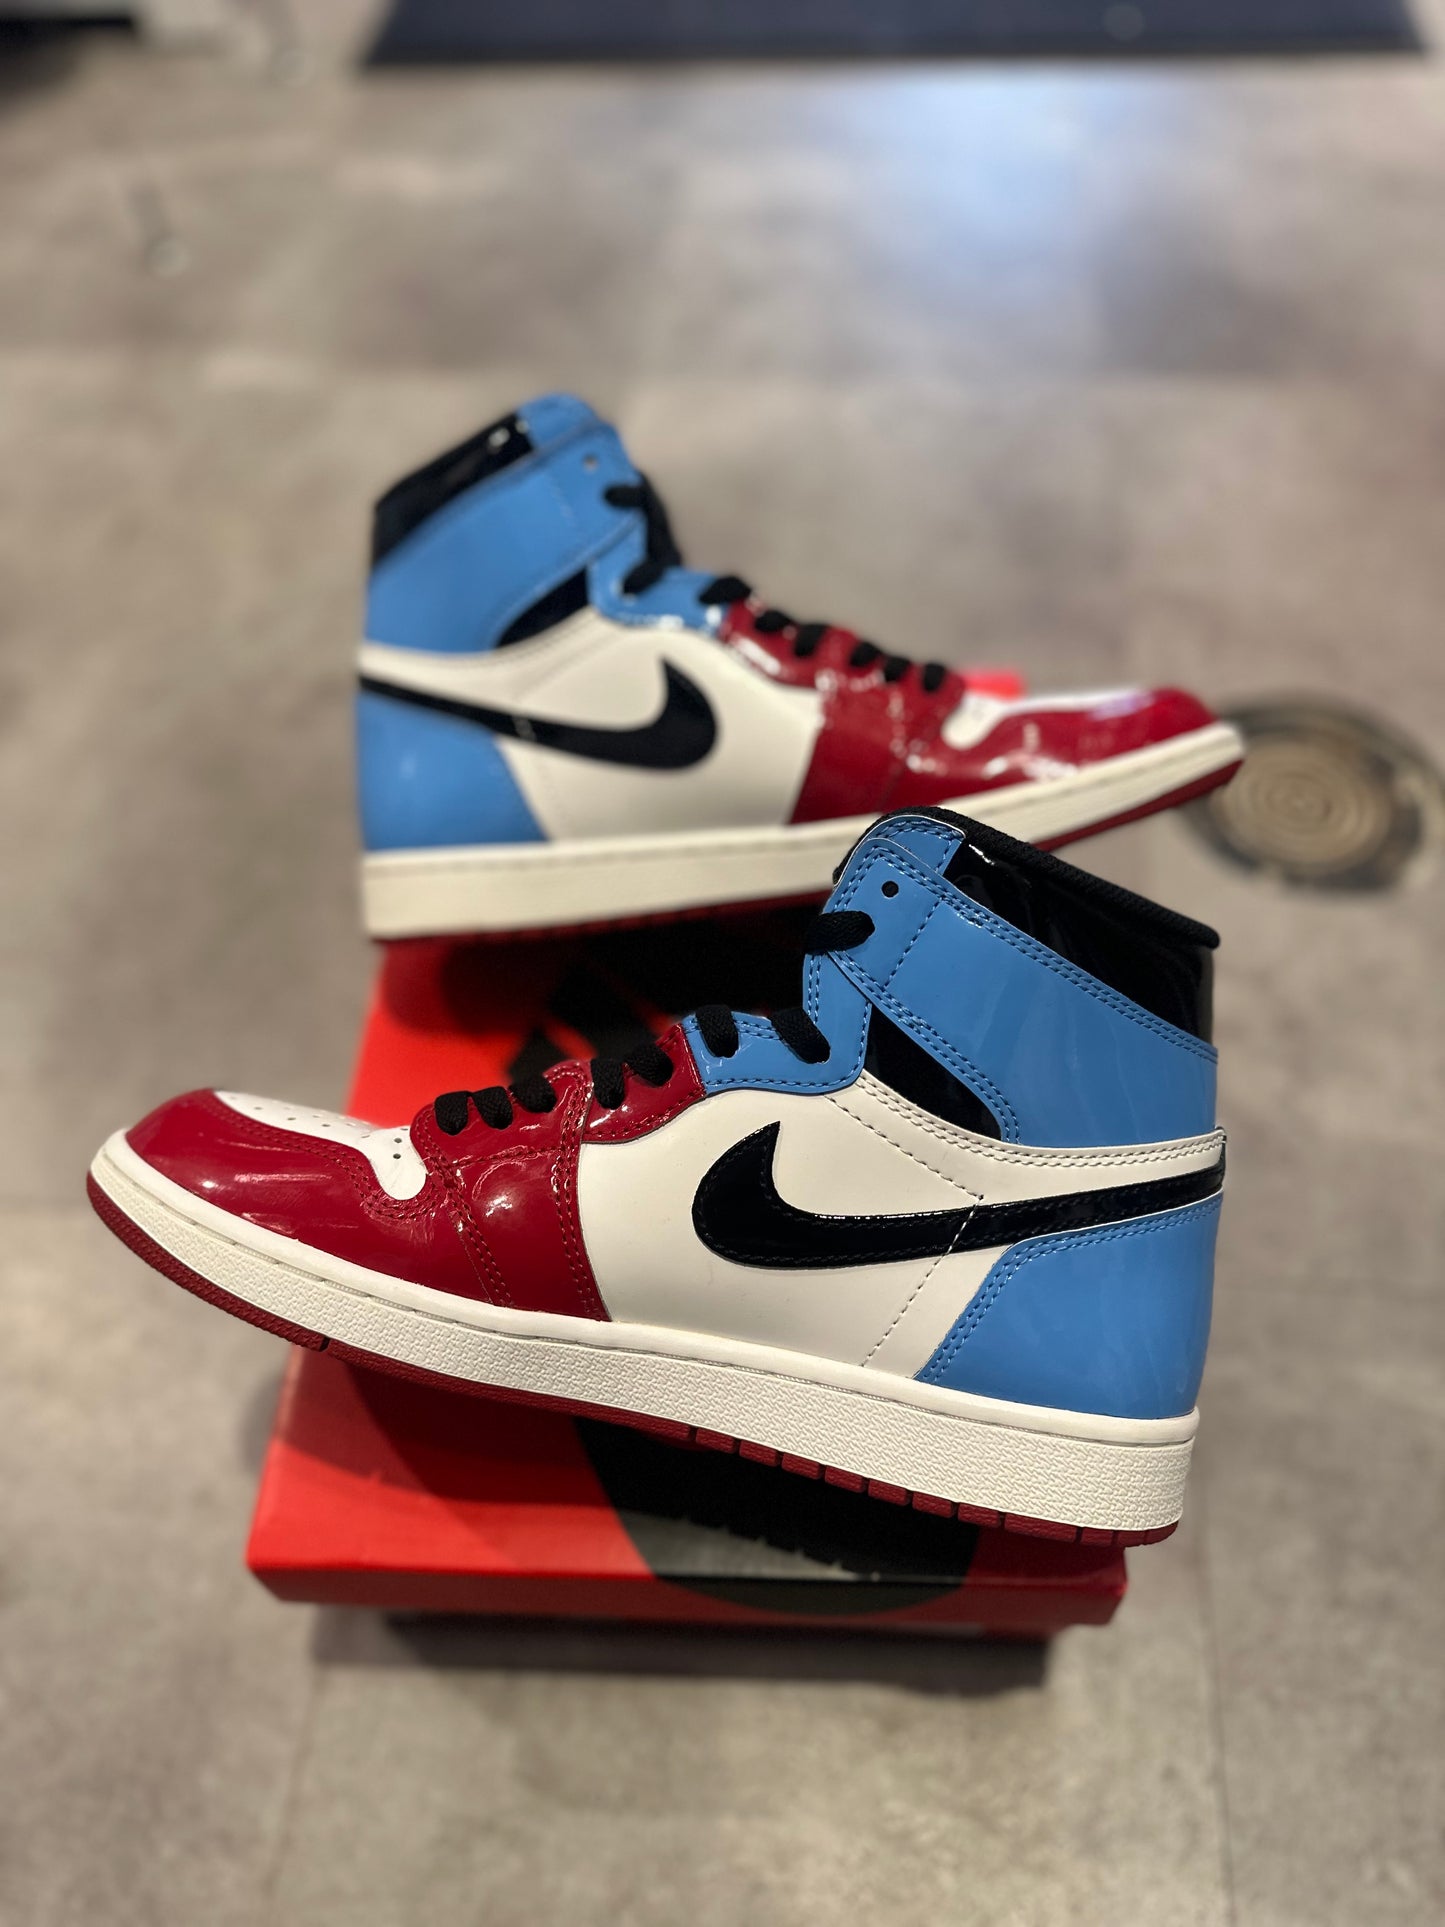 Jordan 1 Retro High Fearless UNC Chicago (Preowned Size 9)